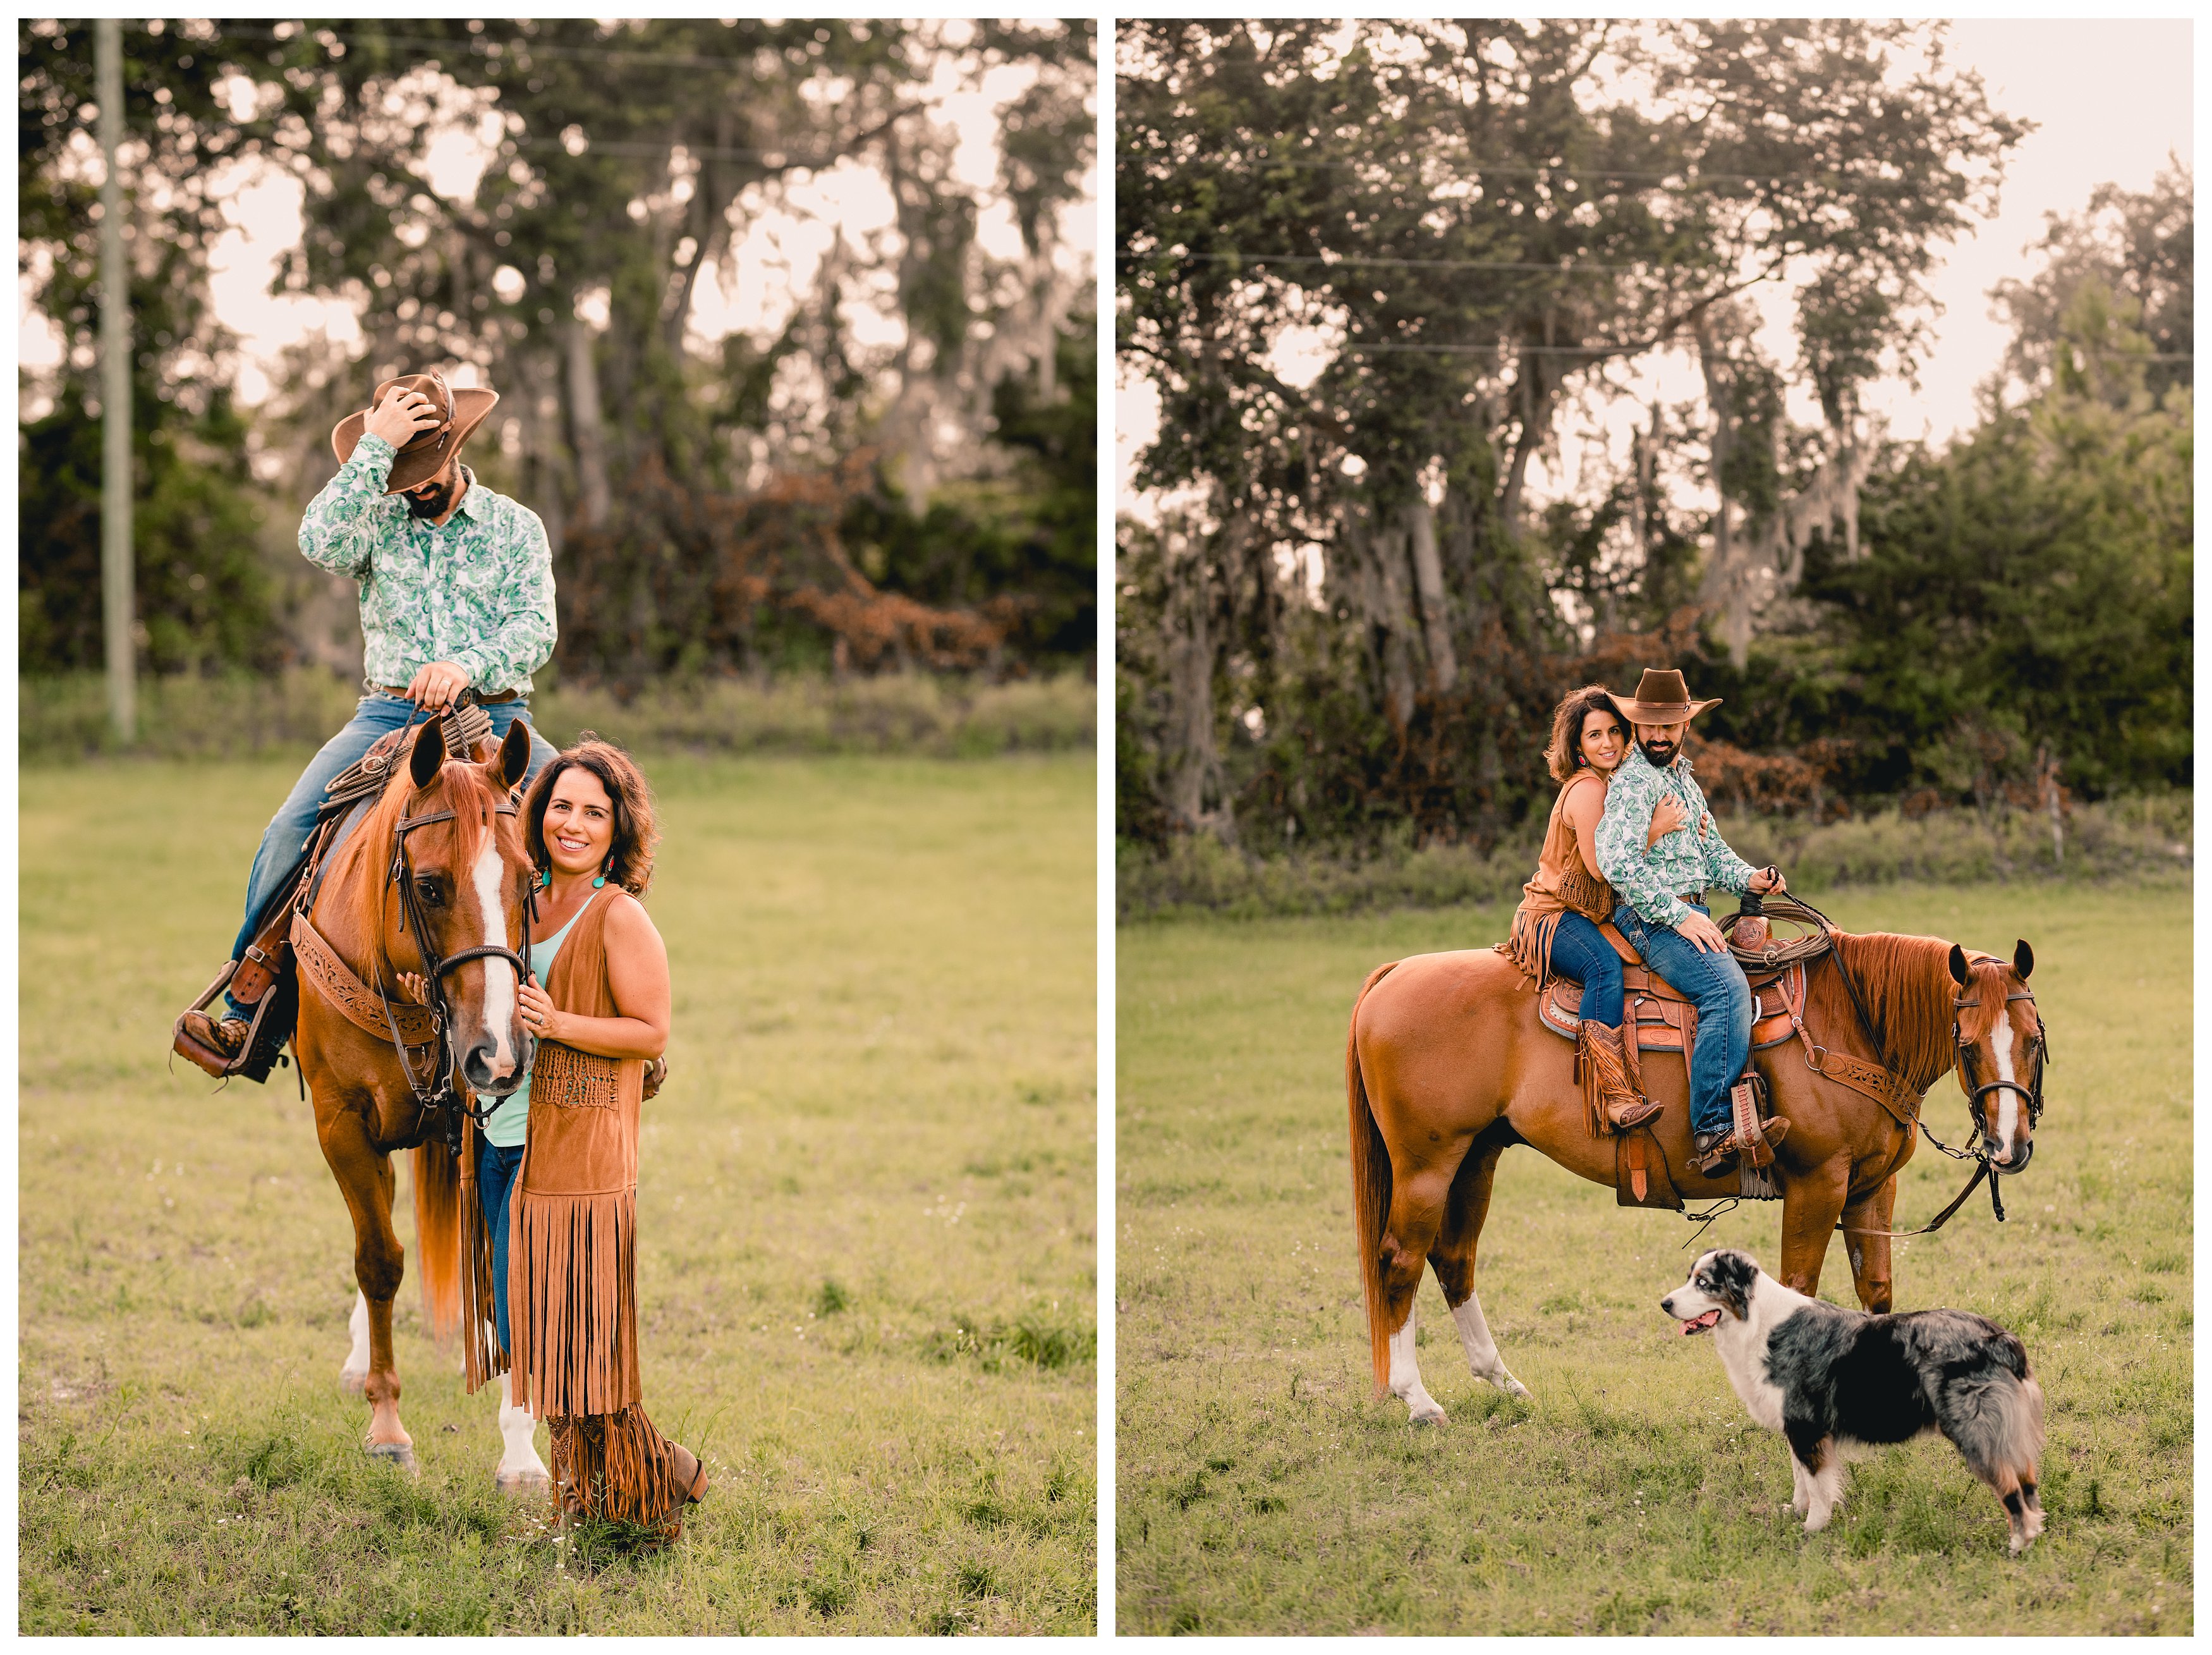 Couple photos taken with horse and dog on a ranch in Gainesville, FL.